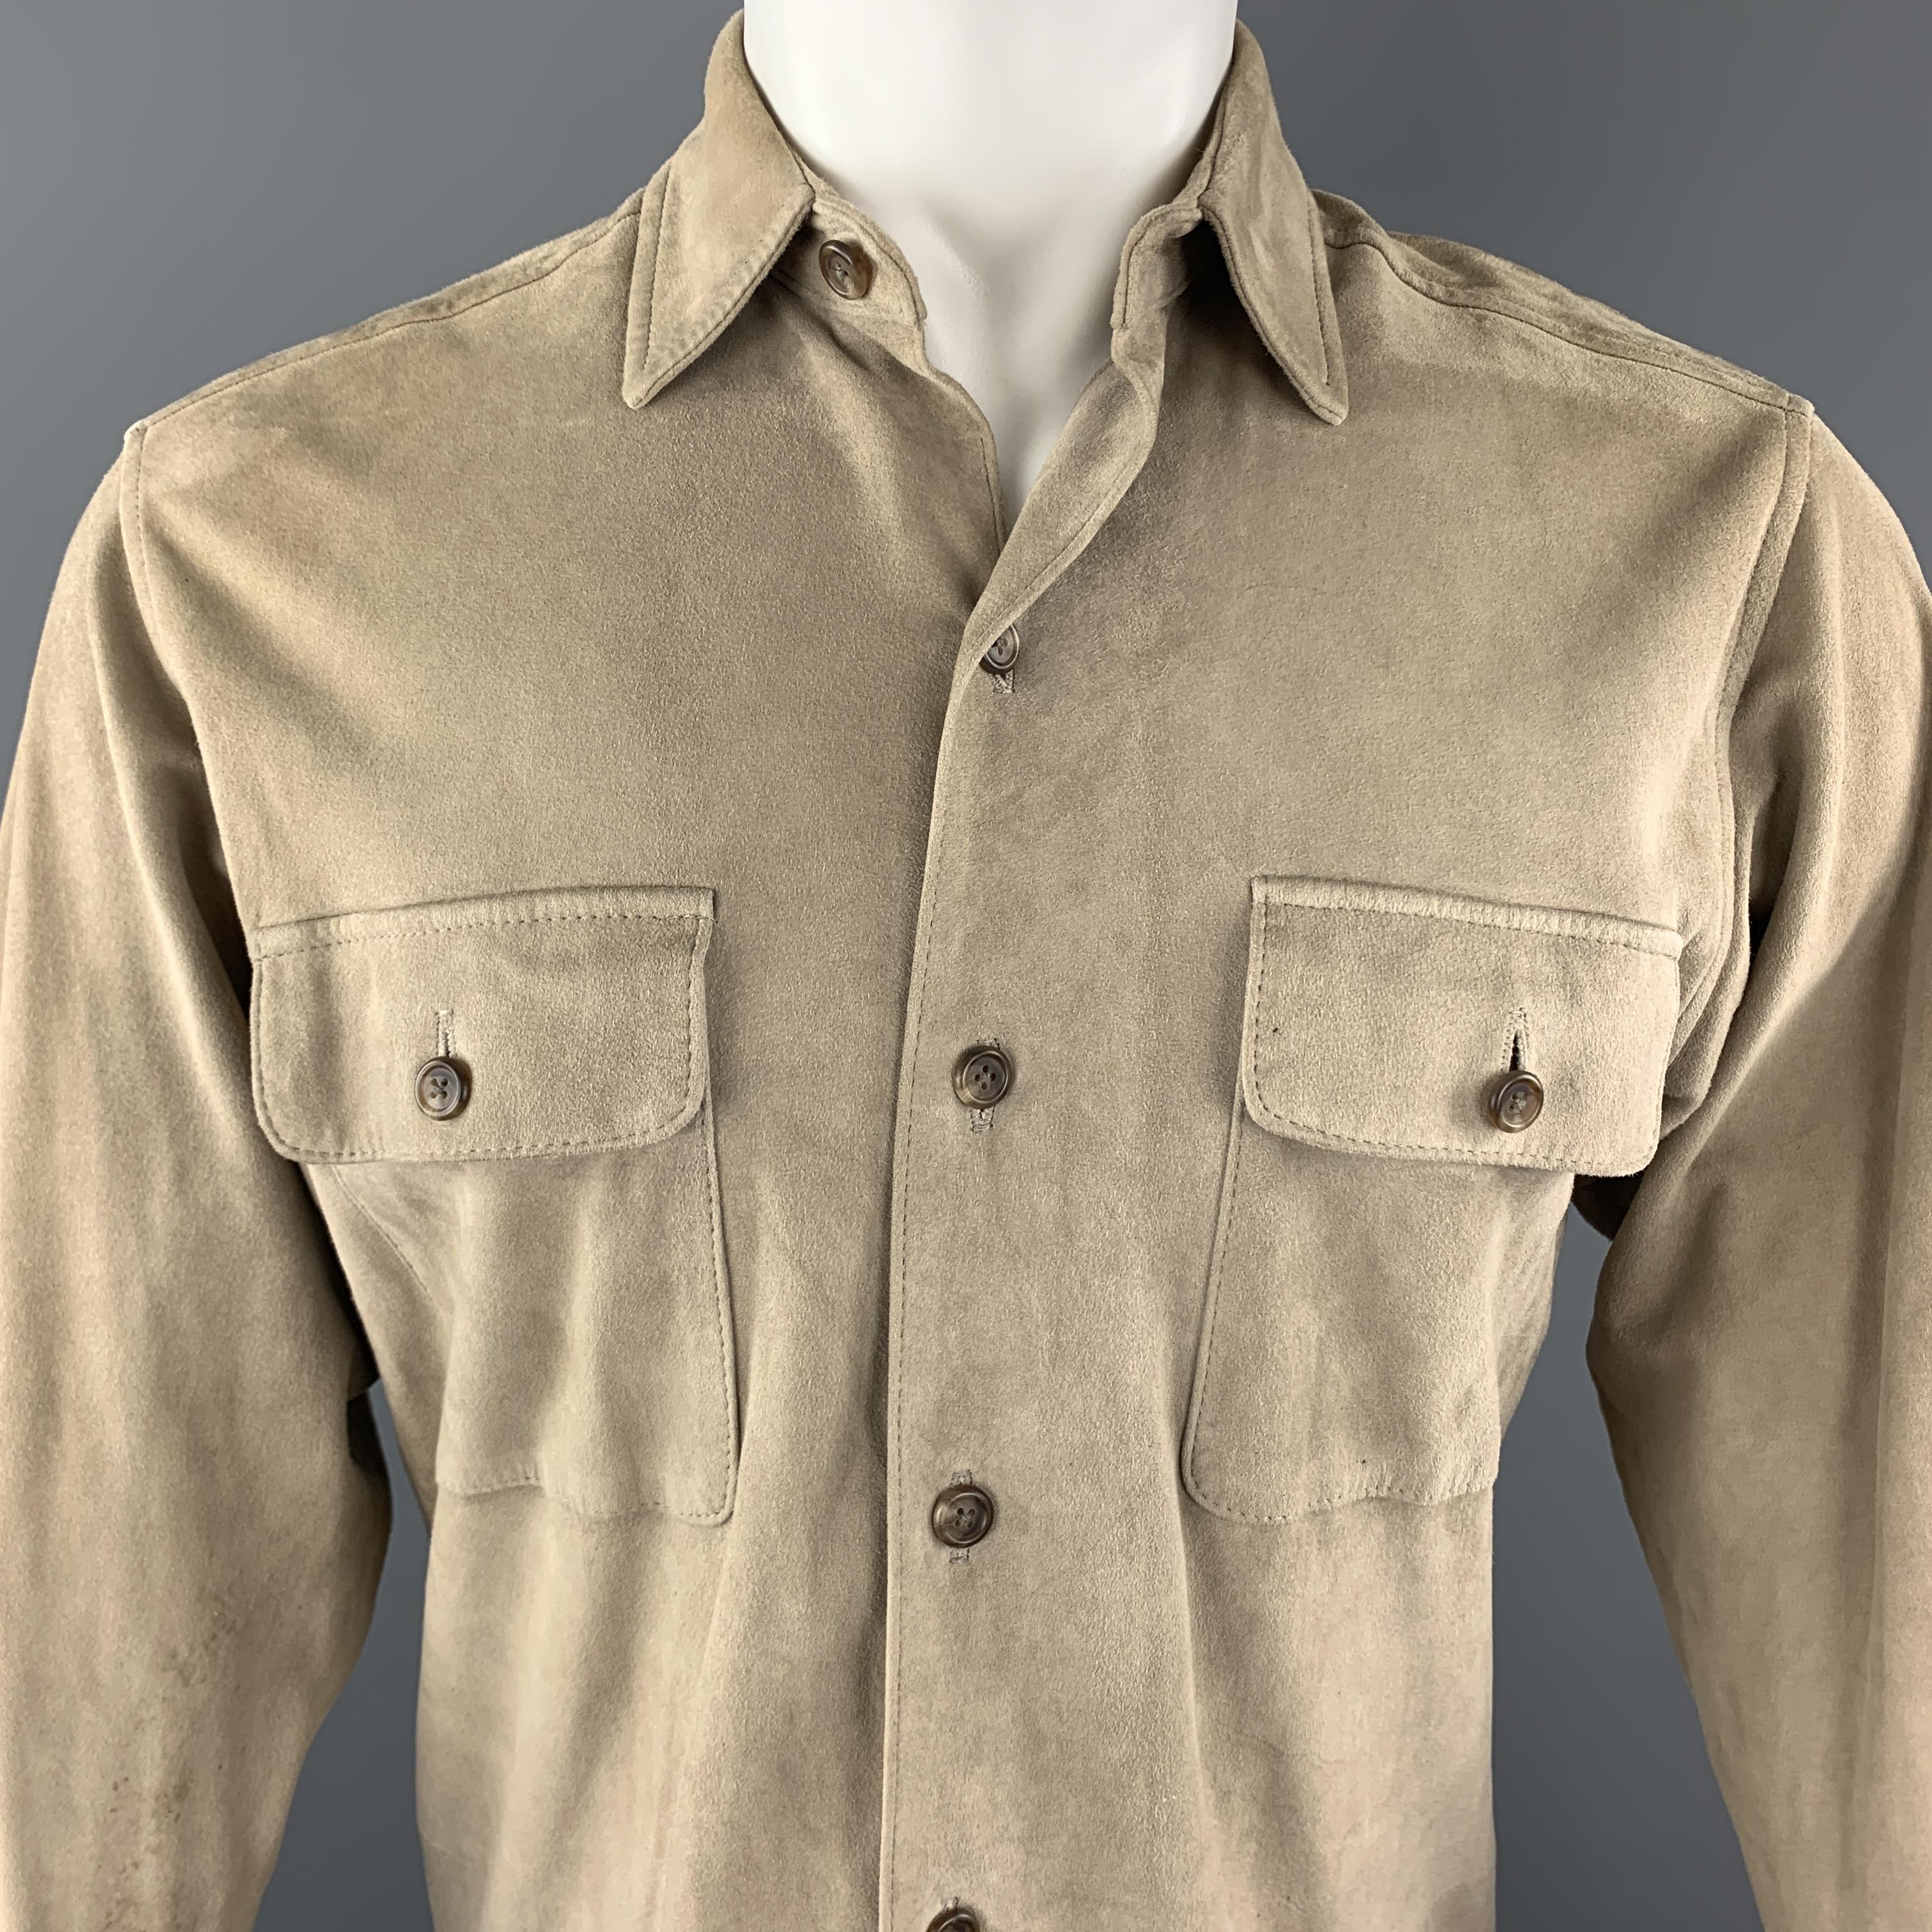 POLO RALPH LAUREN shirt comes in khaki beige suede with a pointed collar and patch flap breast pockets. Partial satin lining at back. Wear and discolorations throughout. As-is.

Fair Pre-Owned Condition.
Marked: S
Original Retail Price: